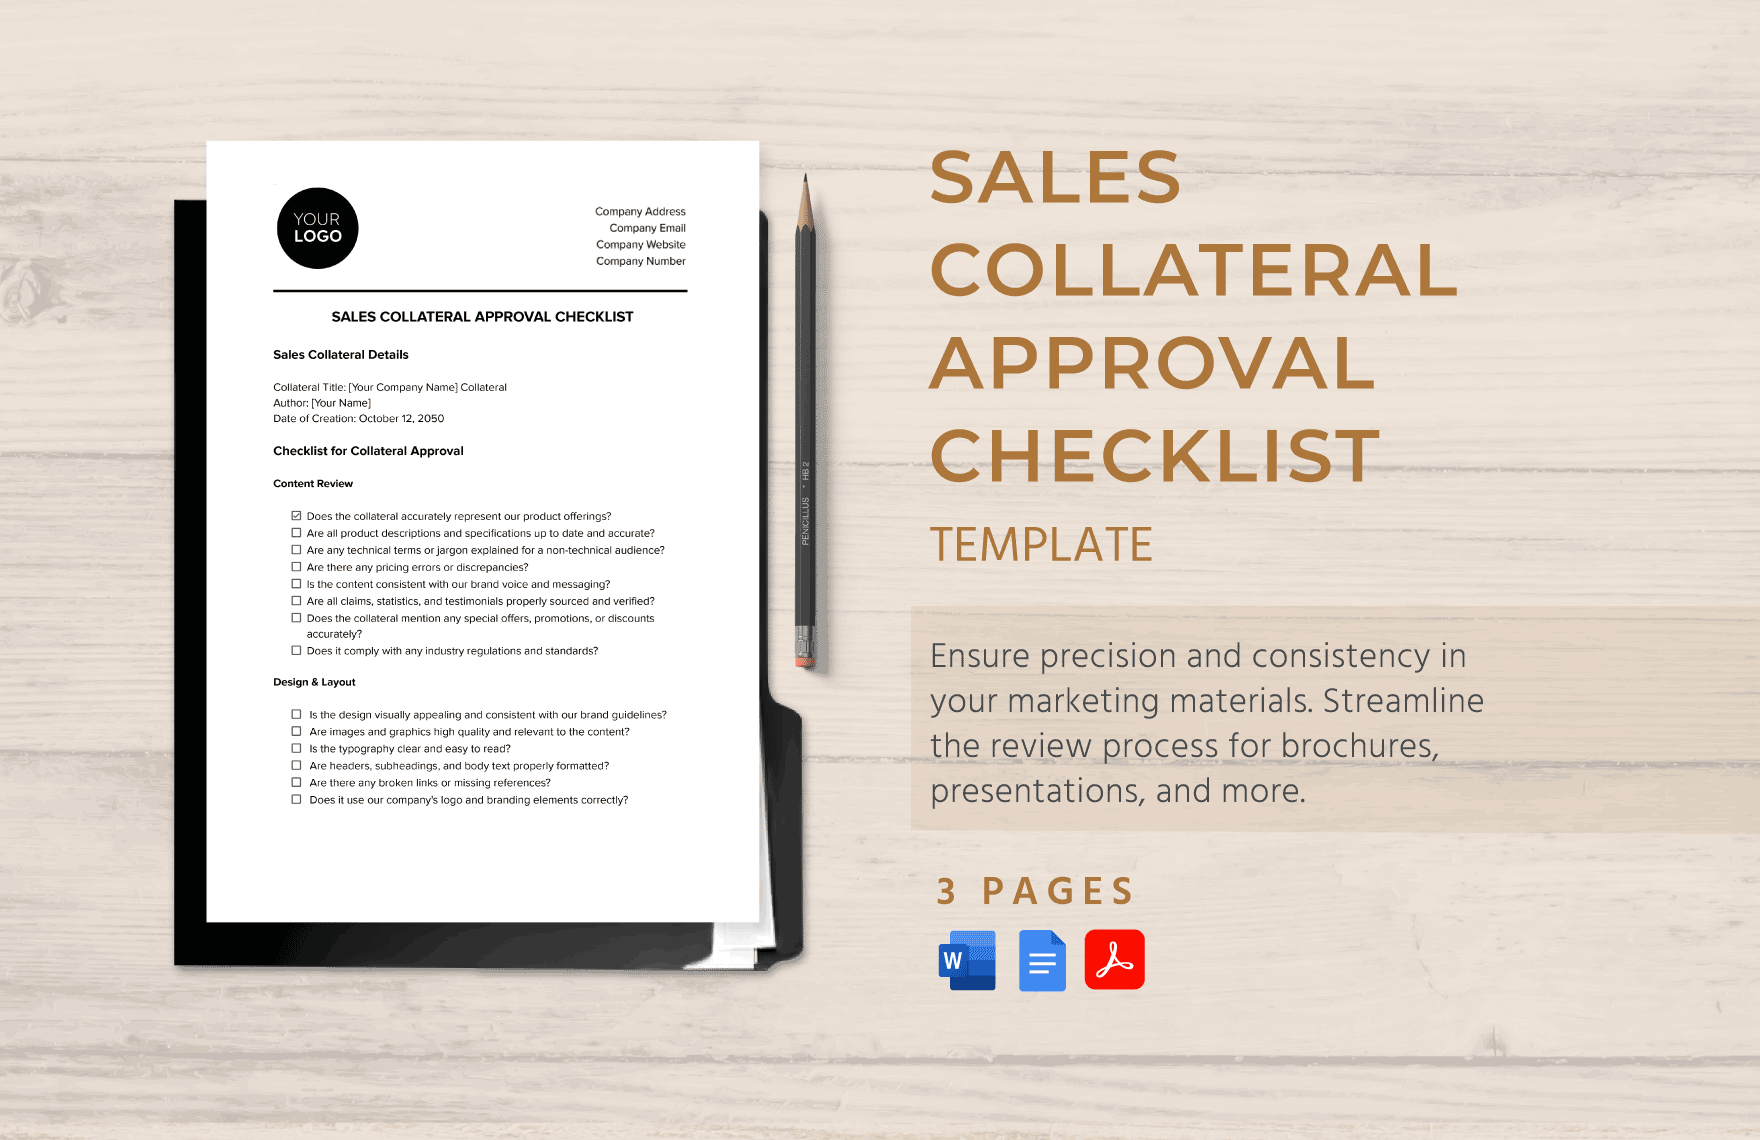 Sales Collateral Approval Checklist Template in Word, Google Docs, PDF